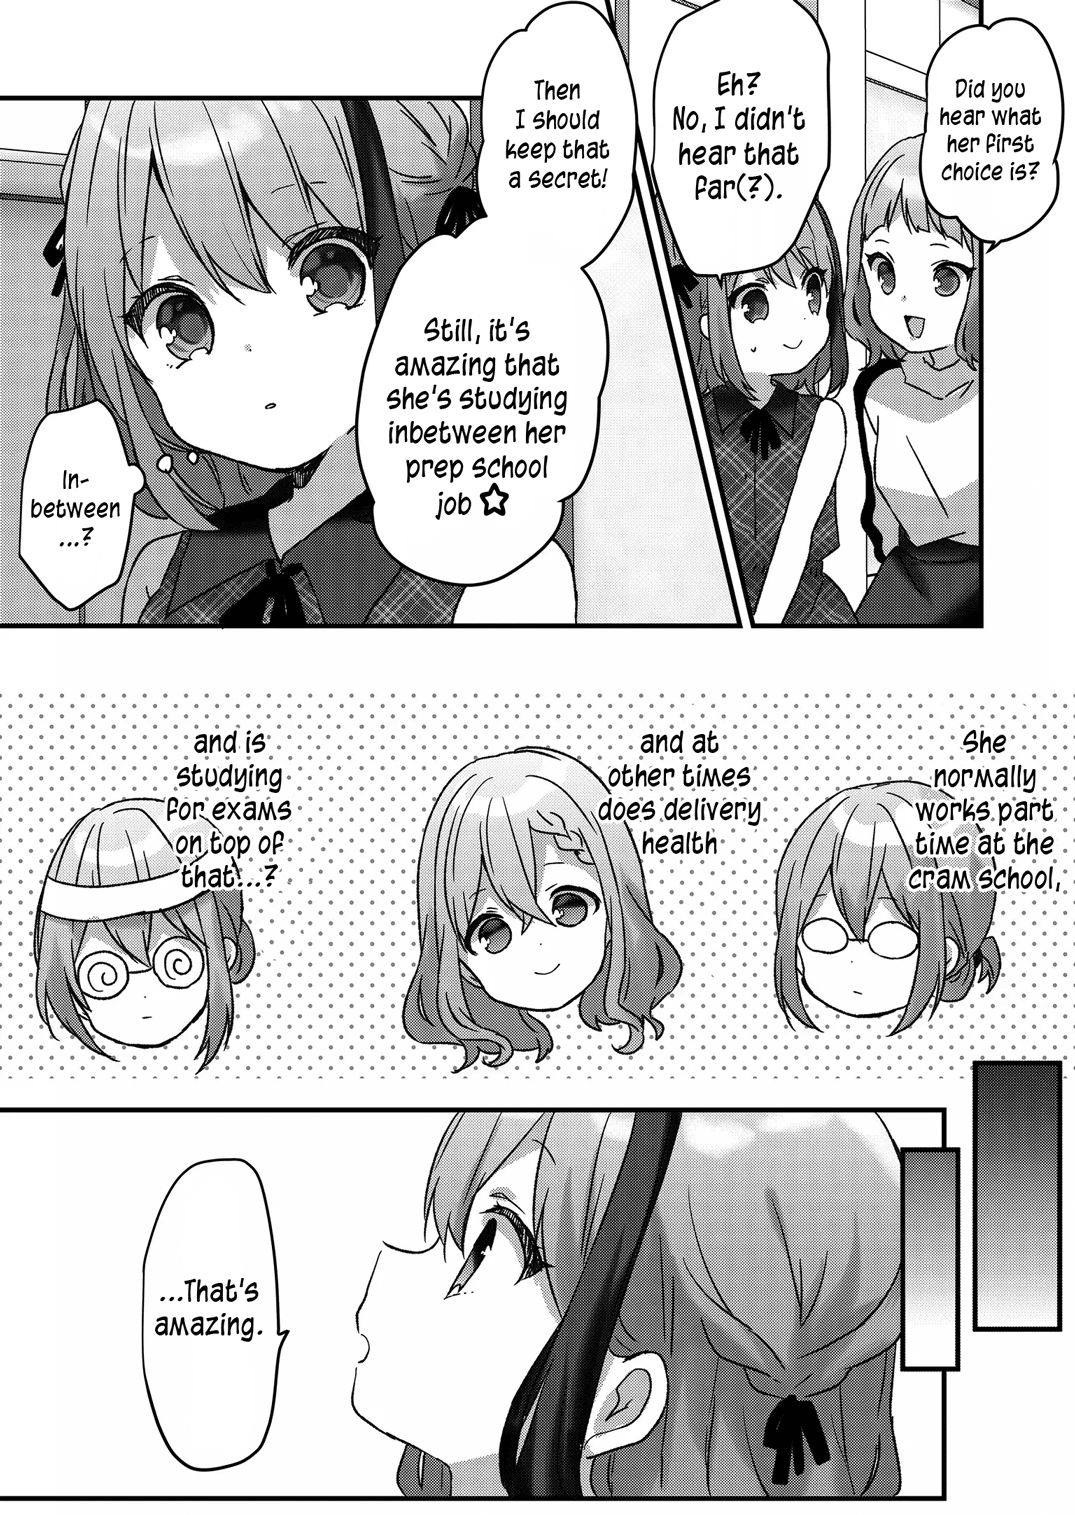 Failed University Exams I am Trash and Life is Hard, so I Tried Calling an Onee-san at Night - chapter 17 - #4